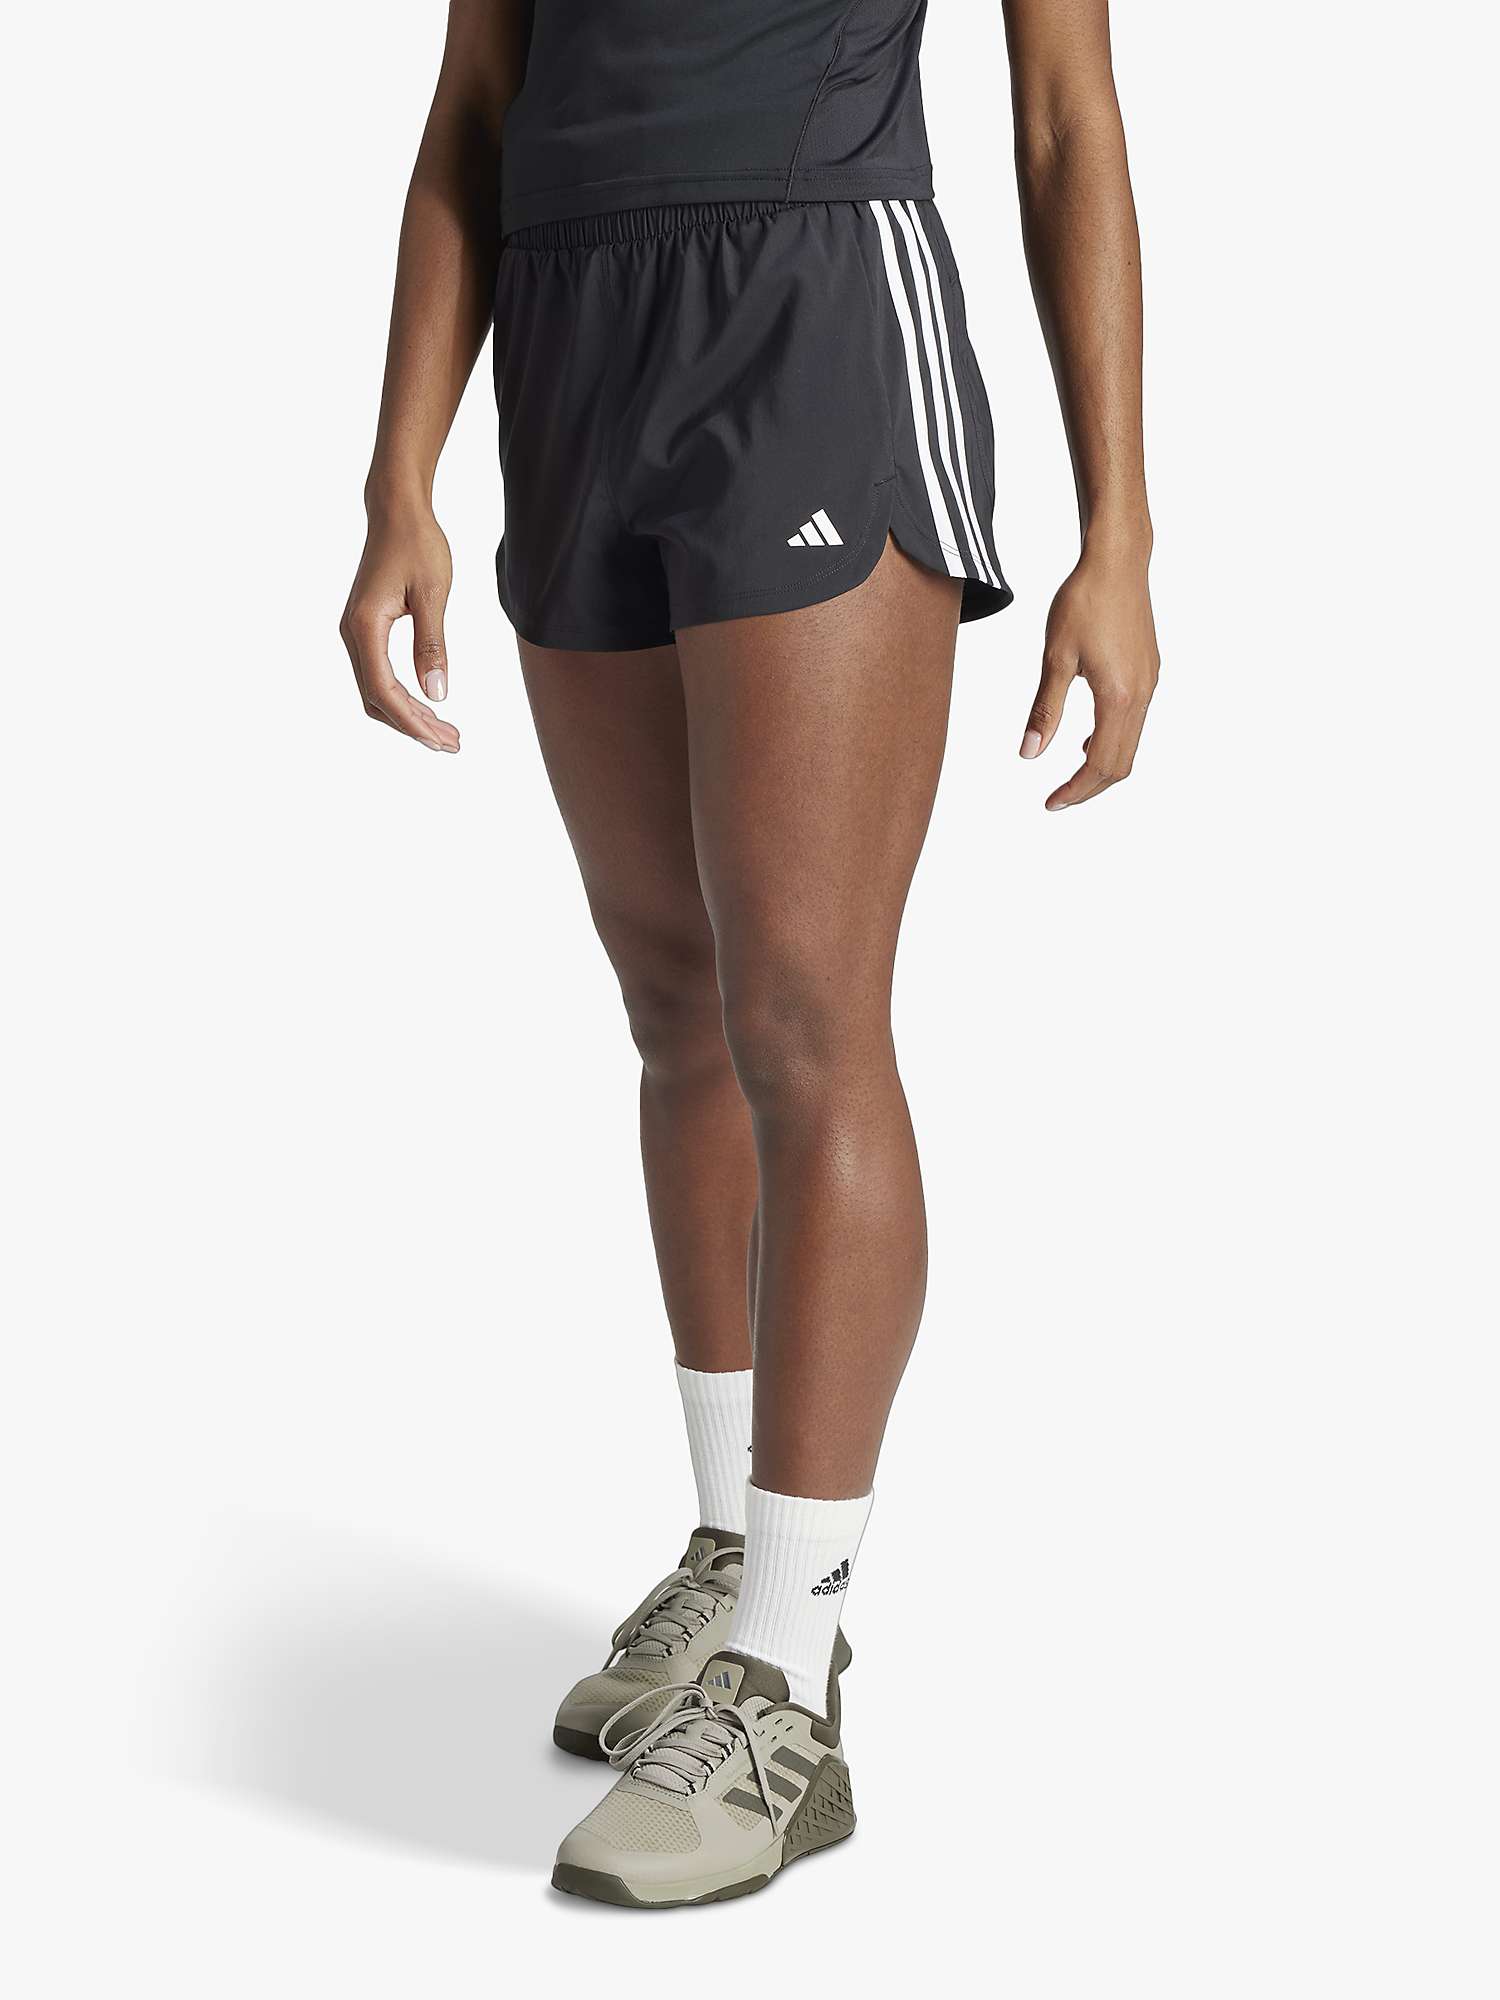 Buy adidas Women's Pacer High Rise 3 Stripes Shorts, Black/White Online at johnlewis.com